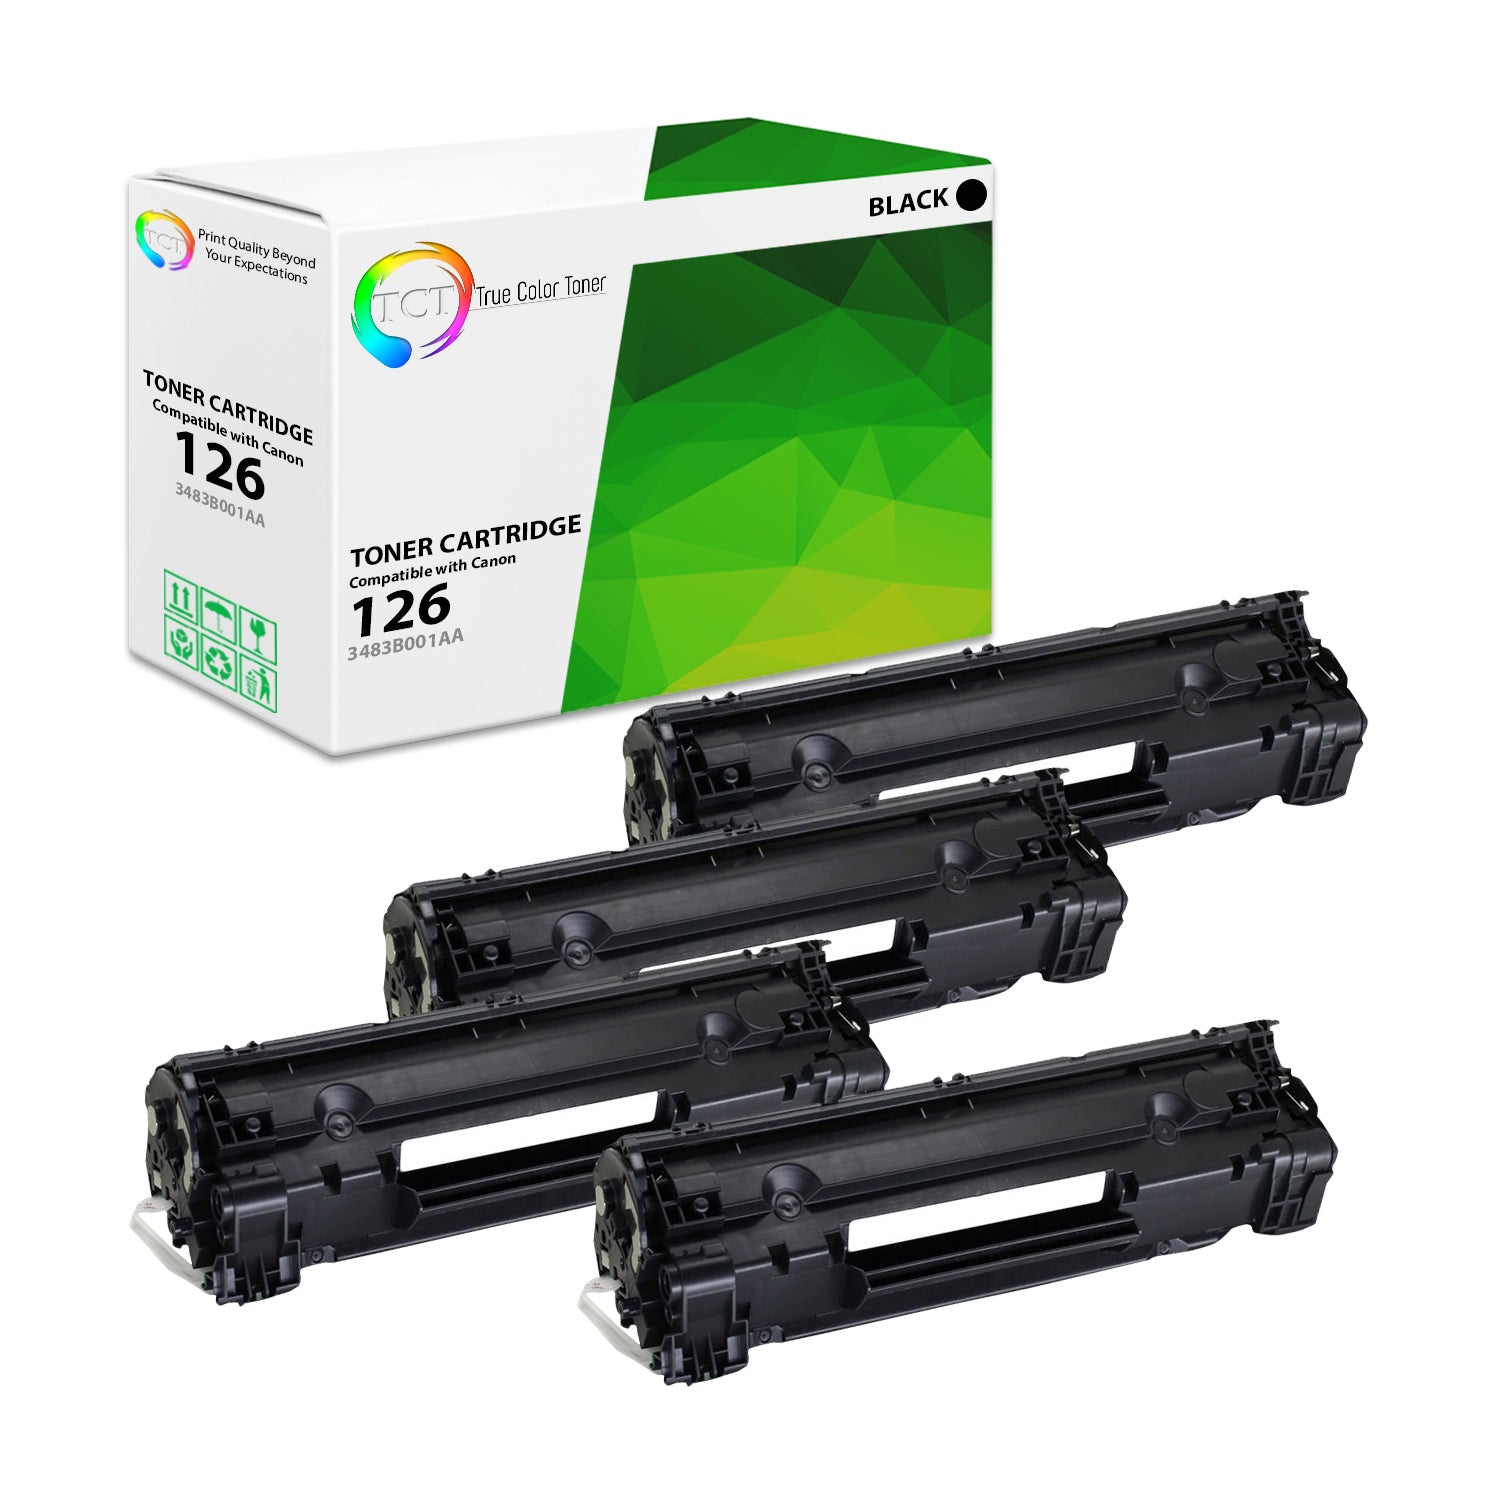 TCT Compatible Toner Cartridge Replacement for the Canon 126 Series - 4 Pack Black